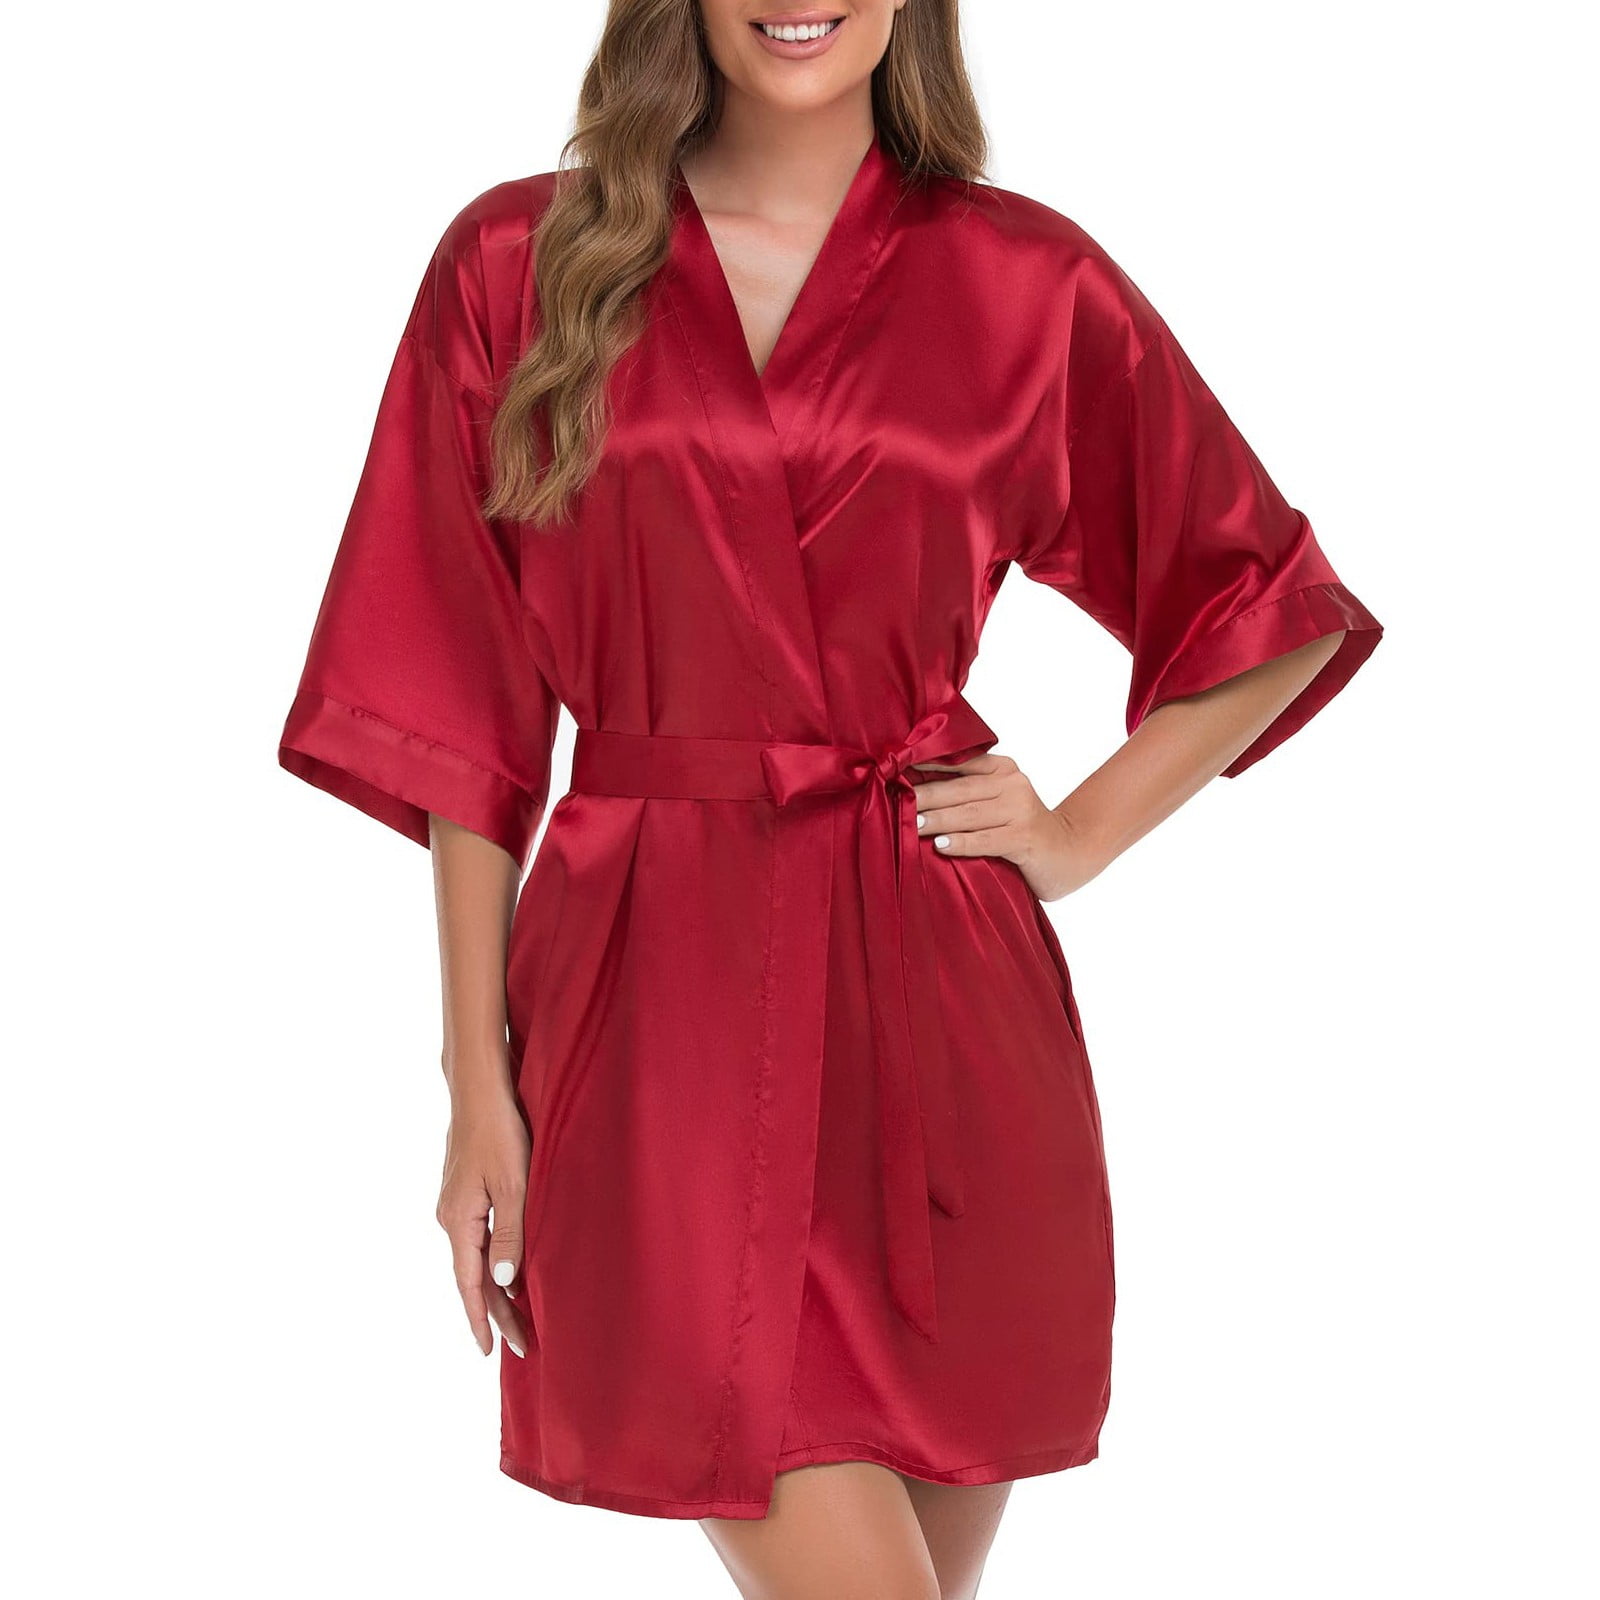 Red Long Bridal Robe With Lace Birthday Gift for Her Kimono - Etsy | Satin  dressing gown, Satin dresses, Dressing gown robe